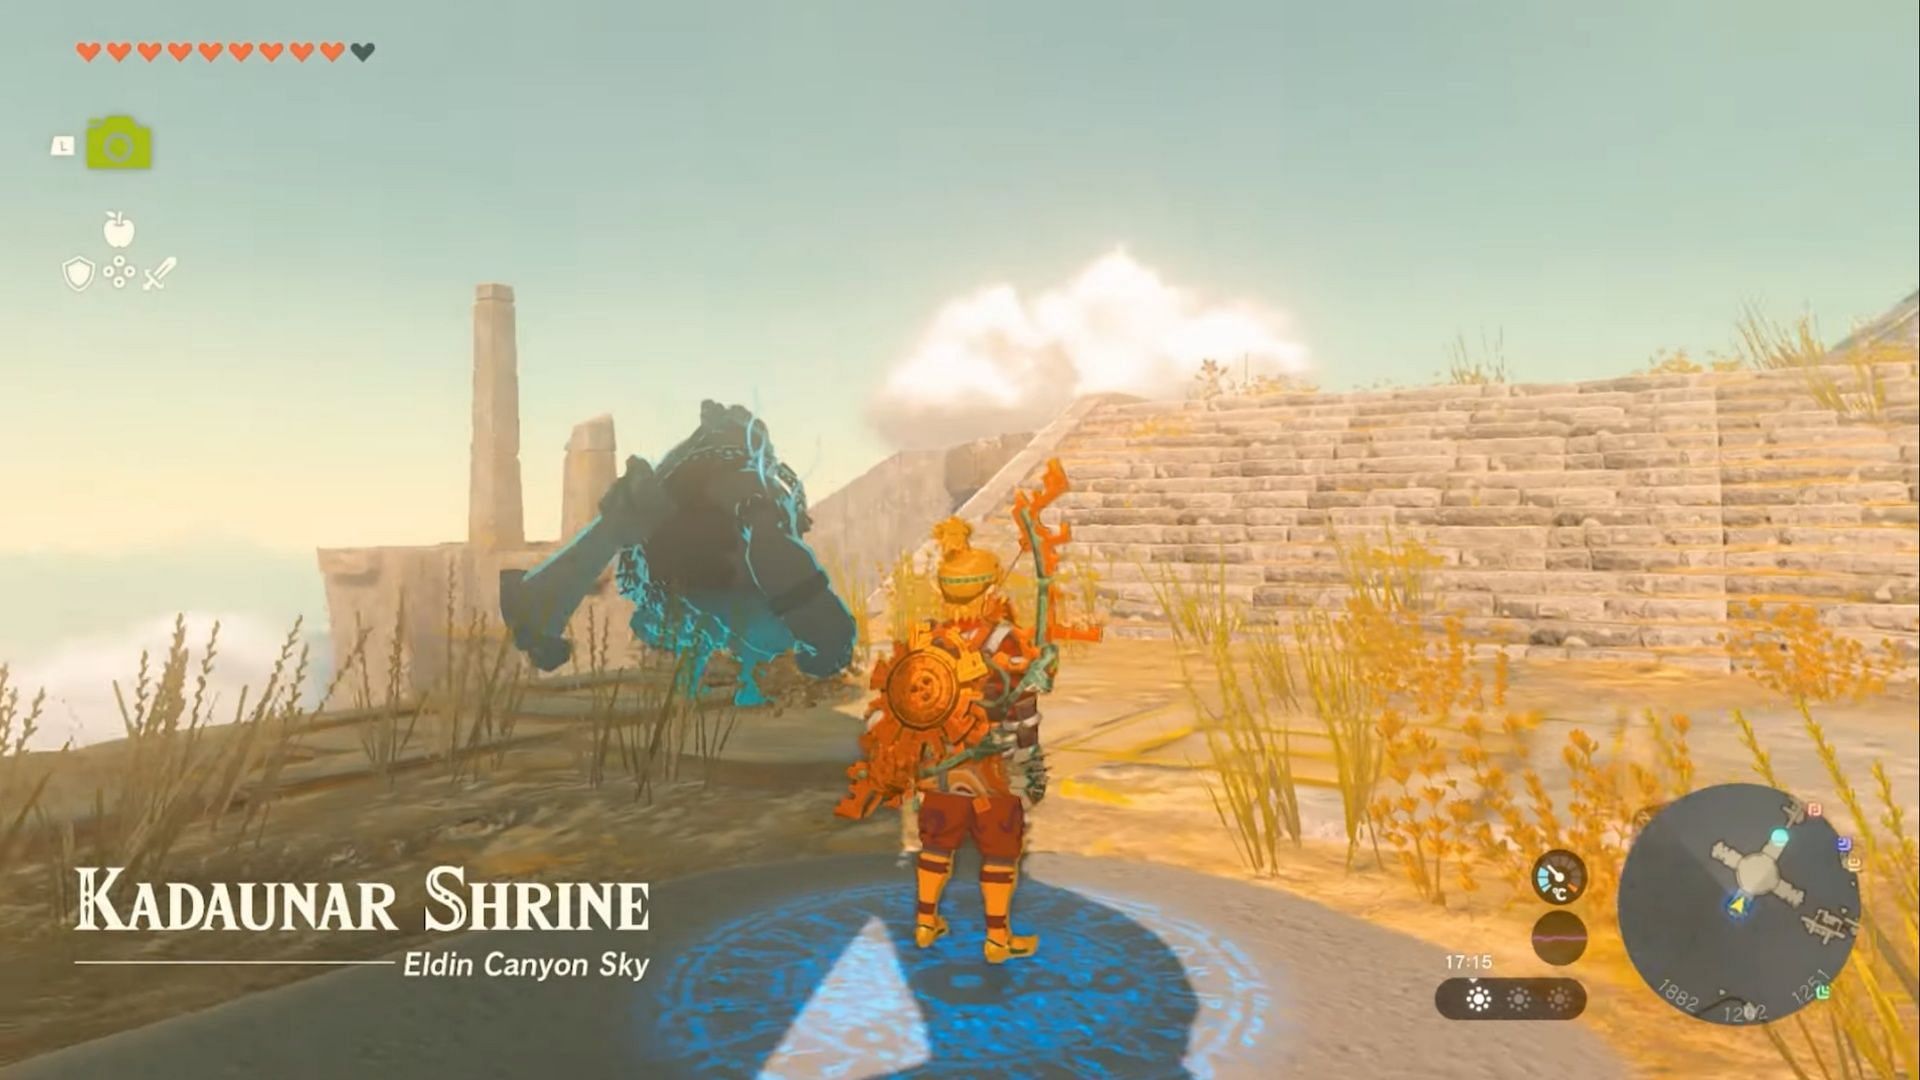 While exploring Eldin Canyon Sky, you can complete the Kadaunar Shrine in The Legend of Zelda Tears of the Kingdom.